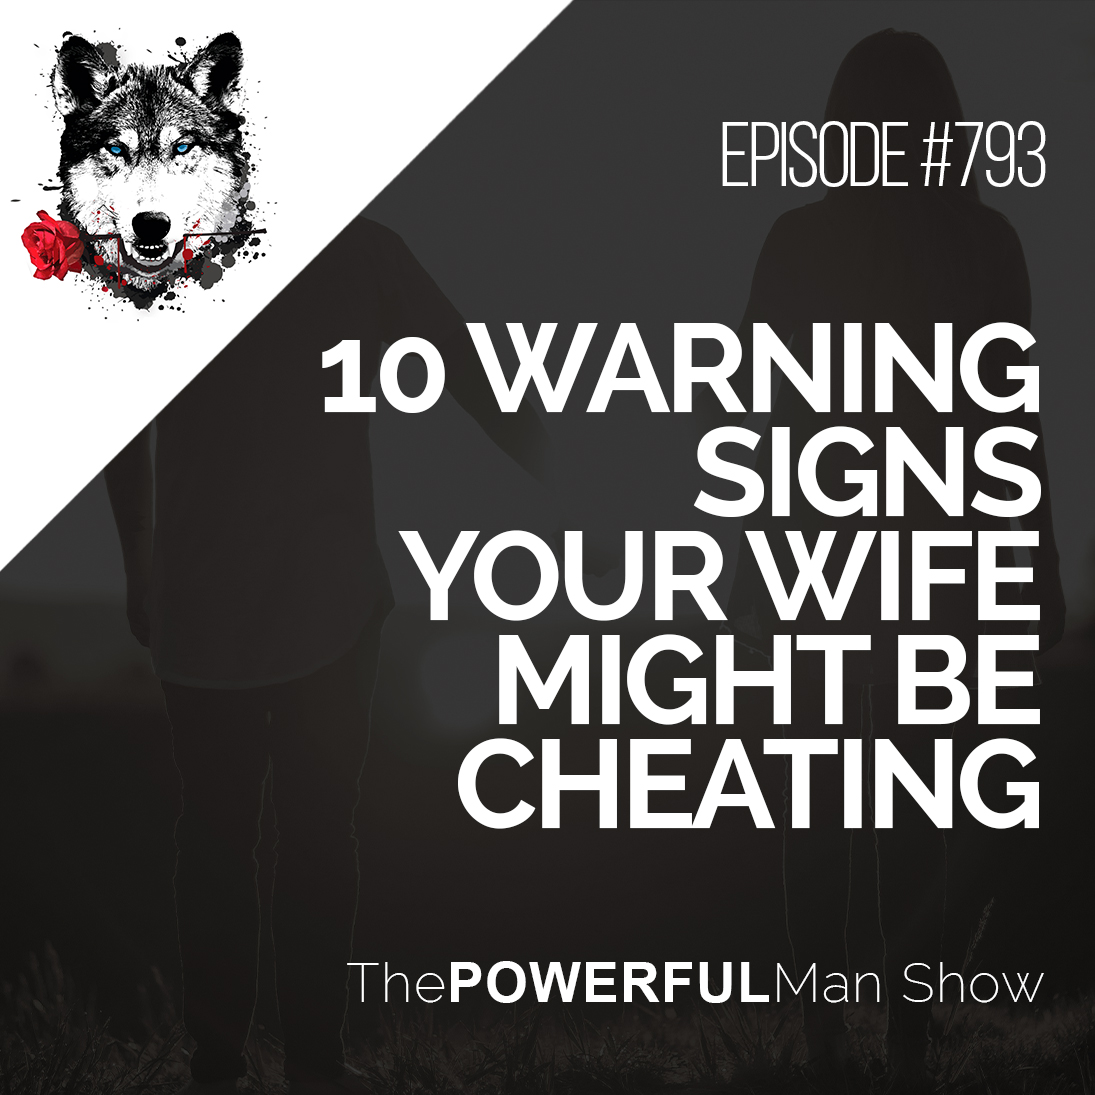 10 Warning Signs Your Wife Might Be Cheating